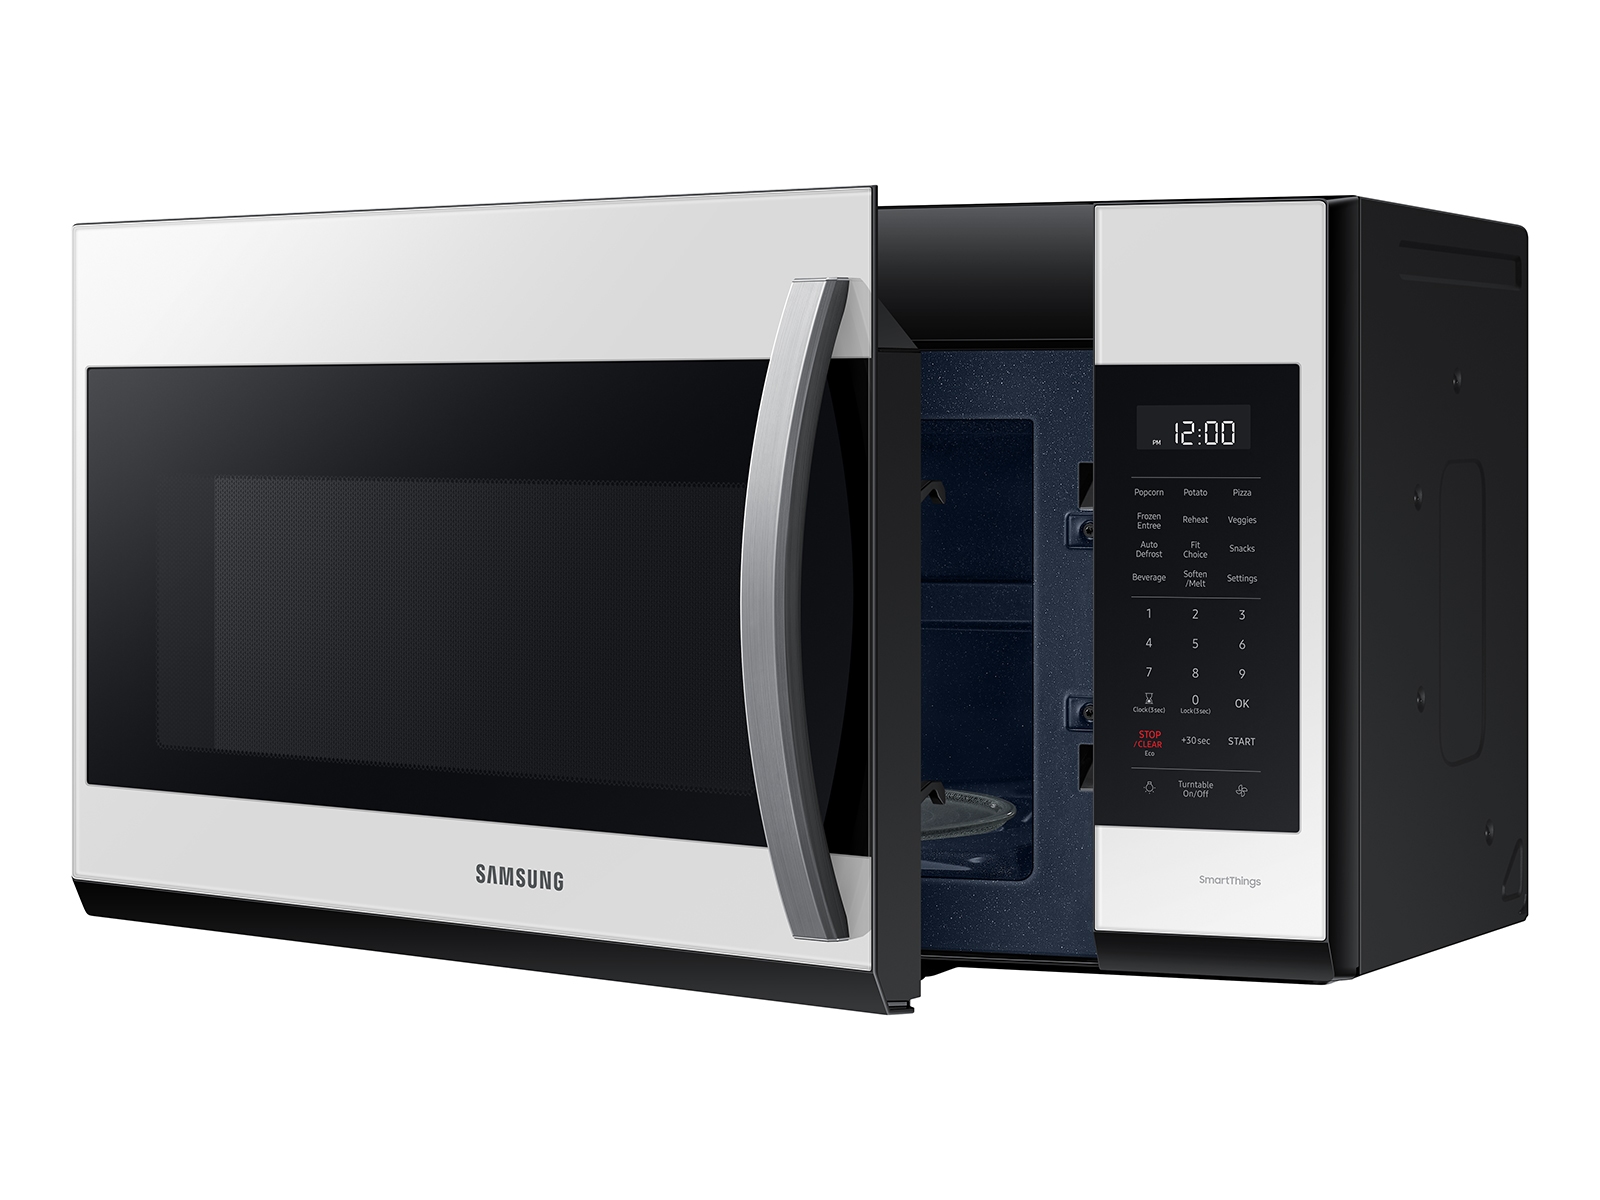 Samsung Space Saving Round Microwave Oven - electronics - by owner